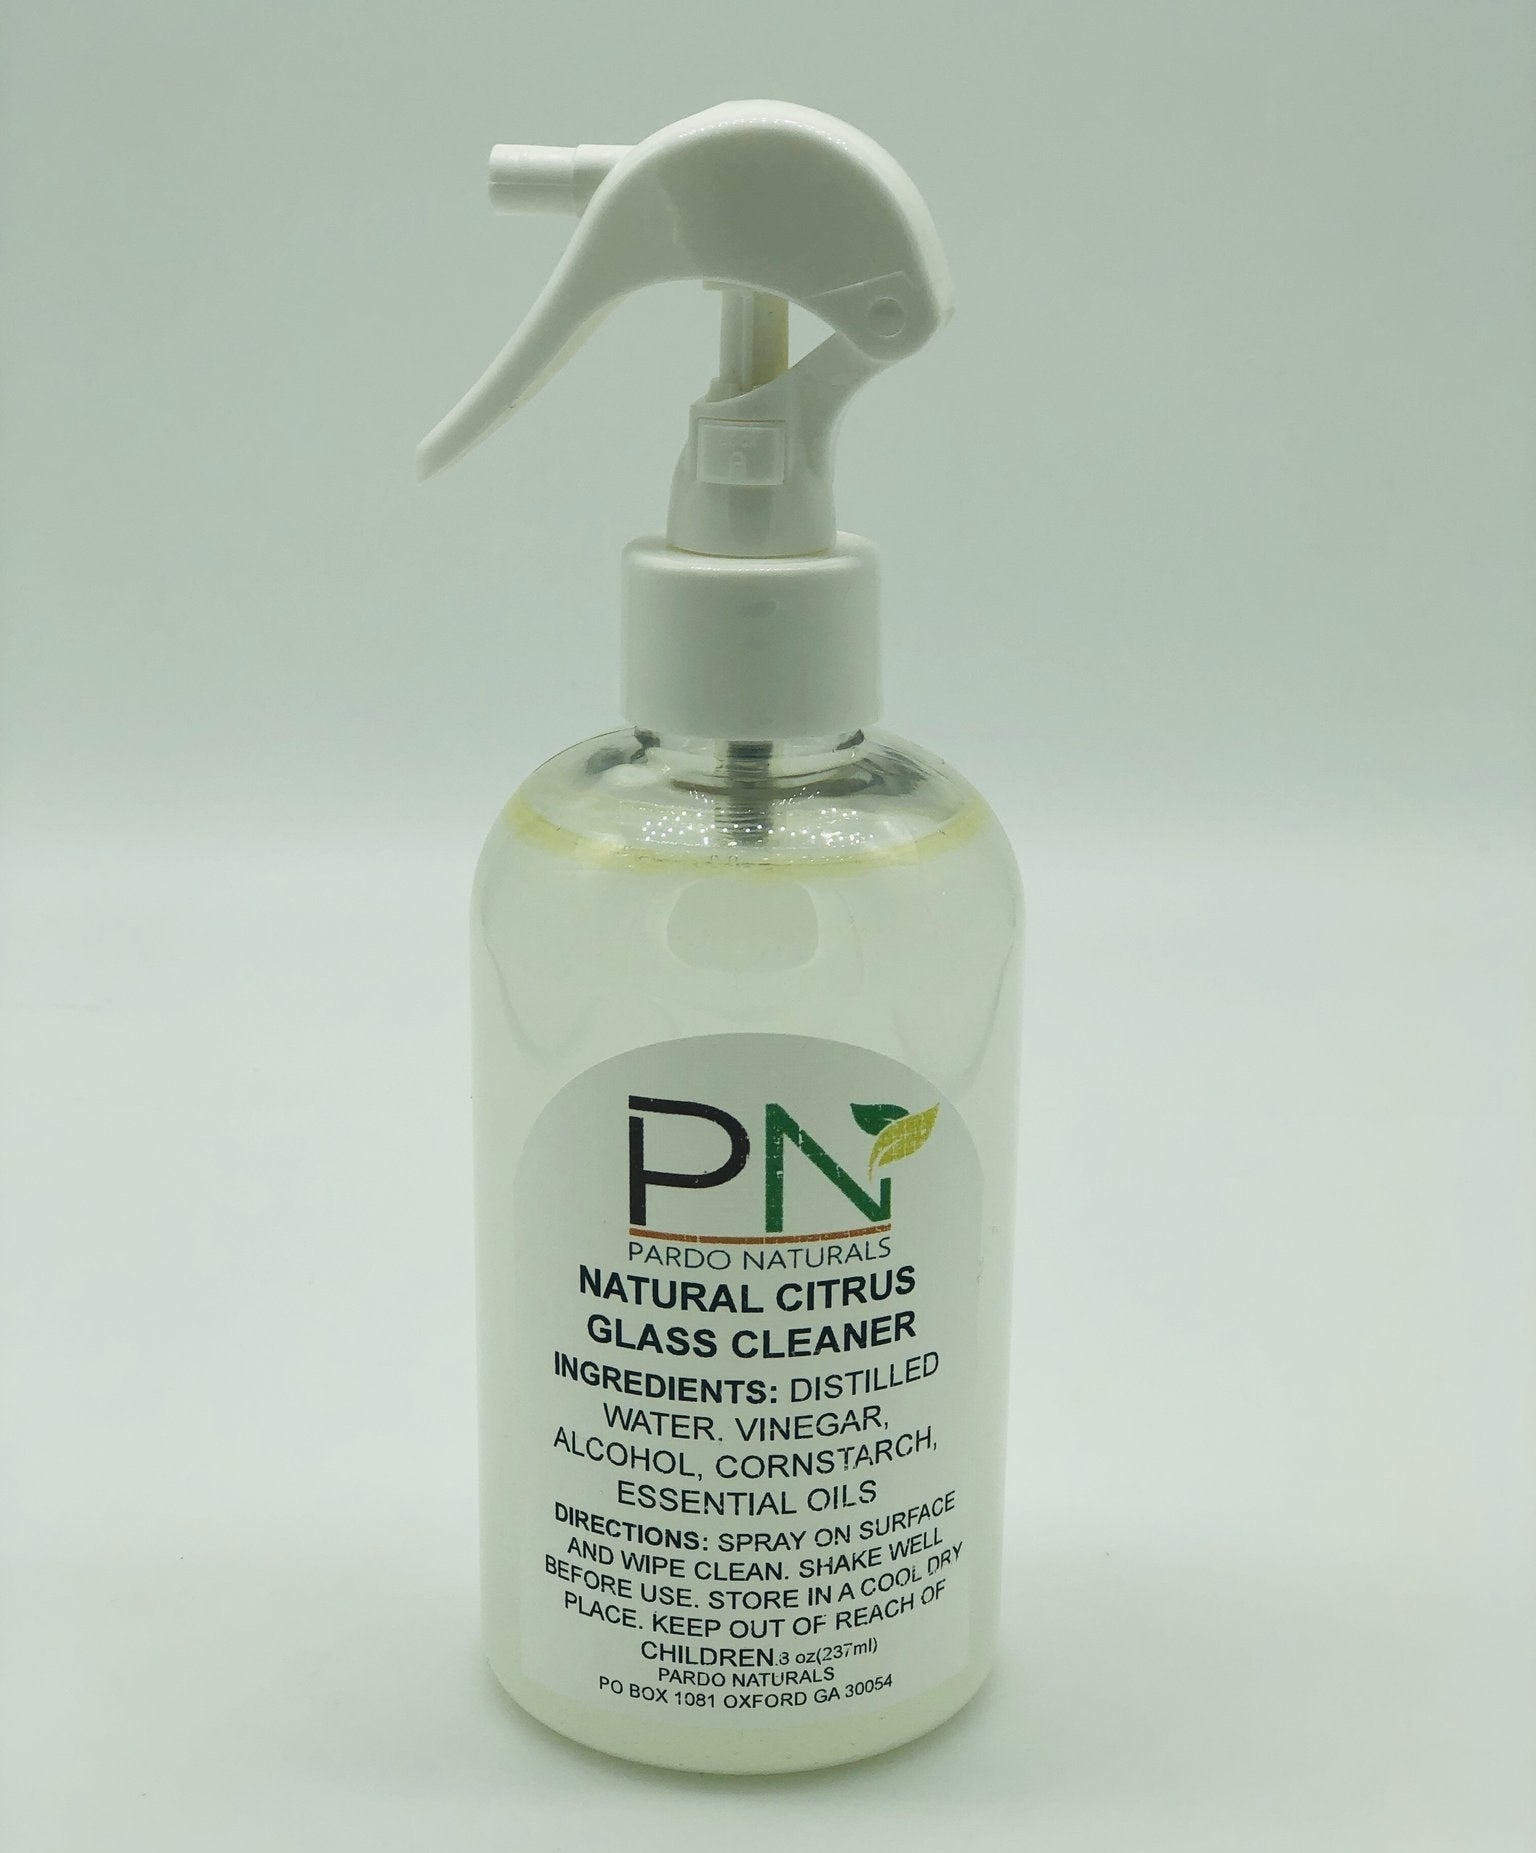 A spray bottle of Pardo Naturals Natural Citrus Glass Cleaner 